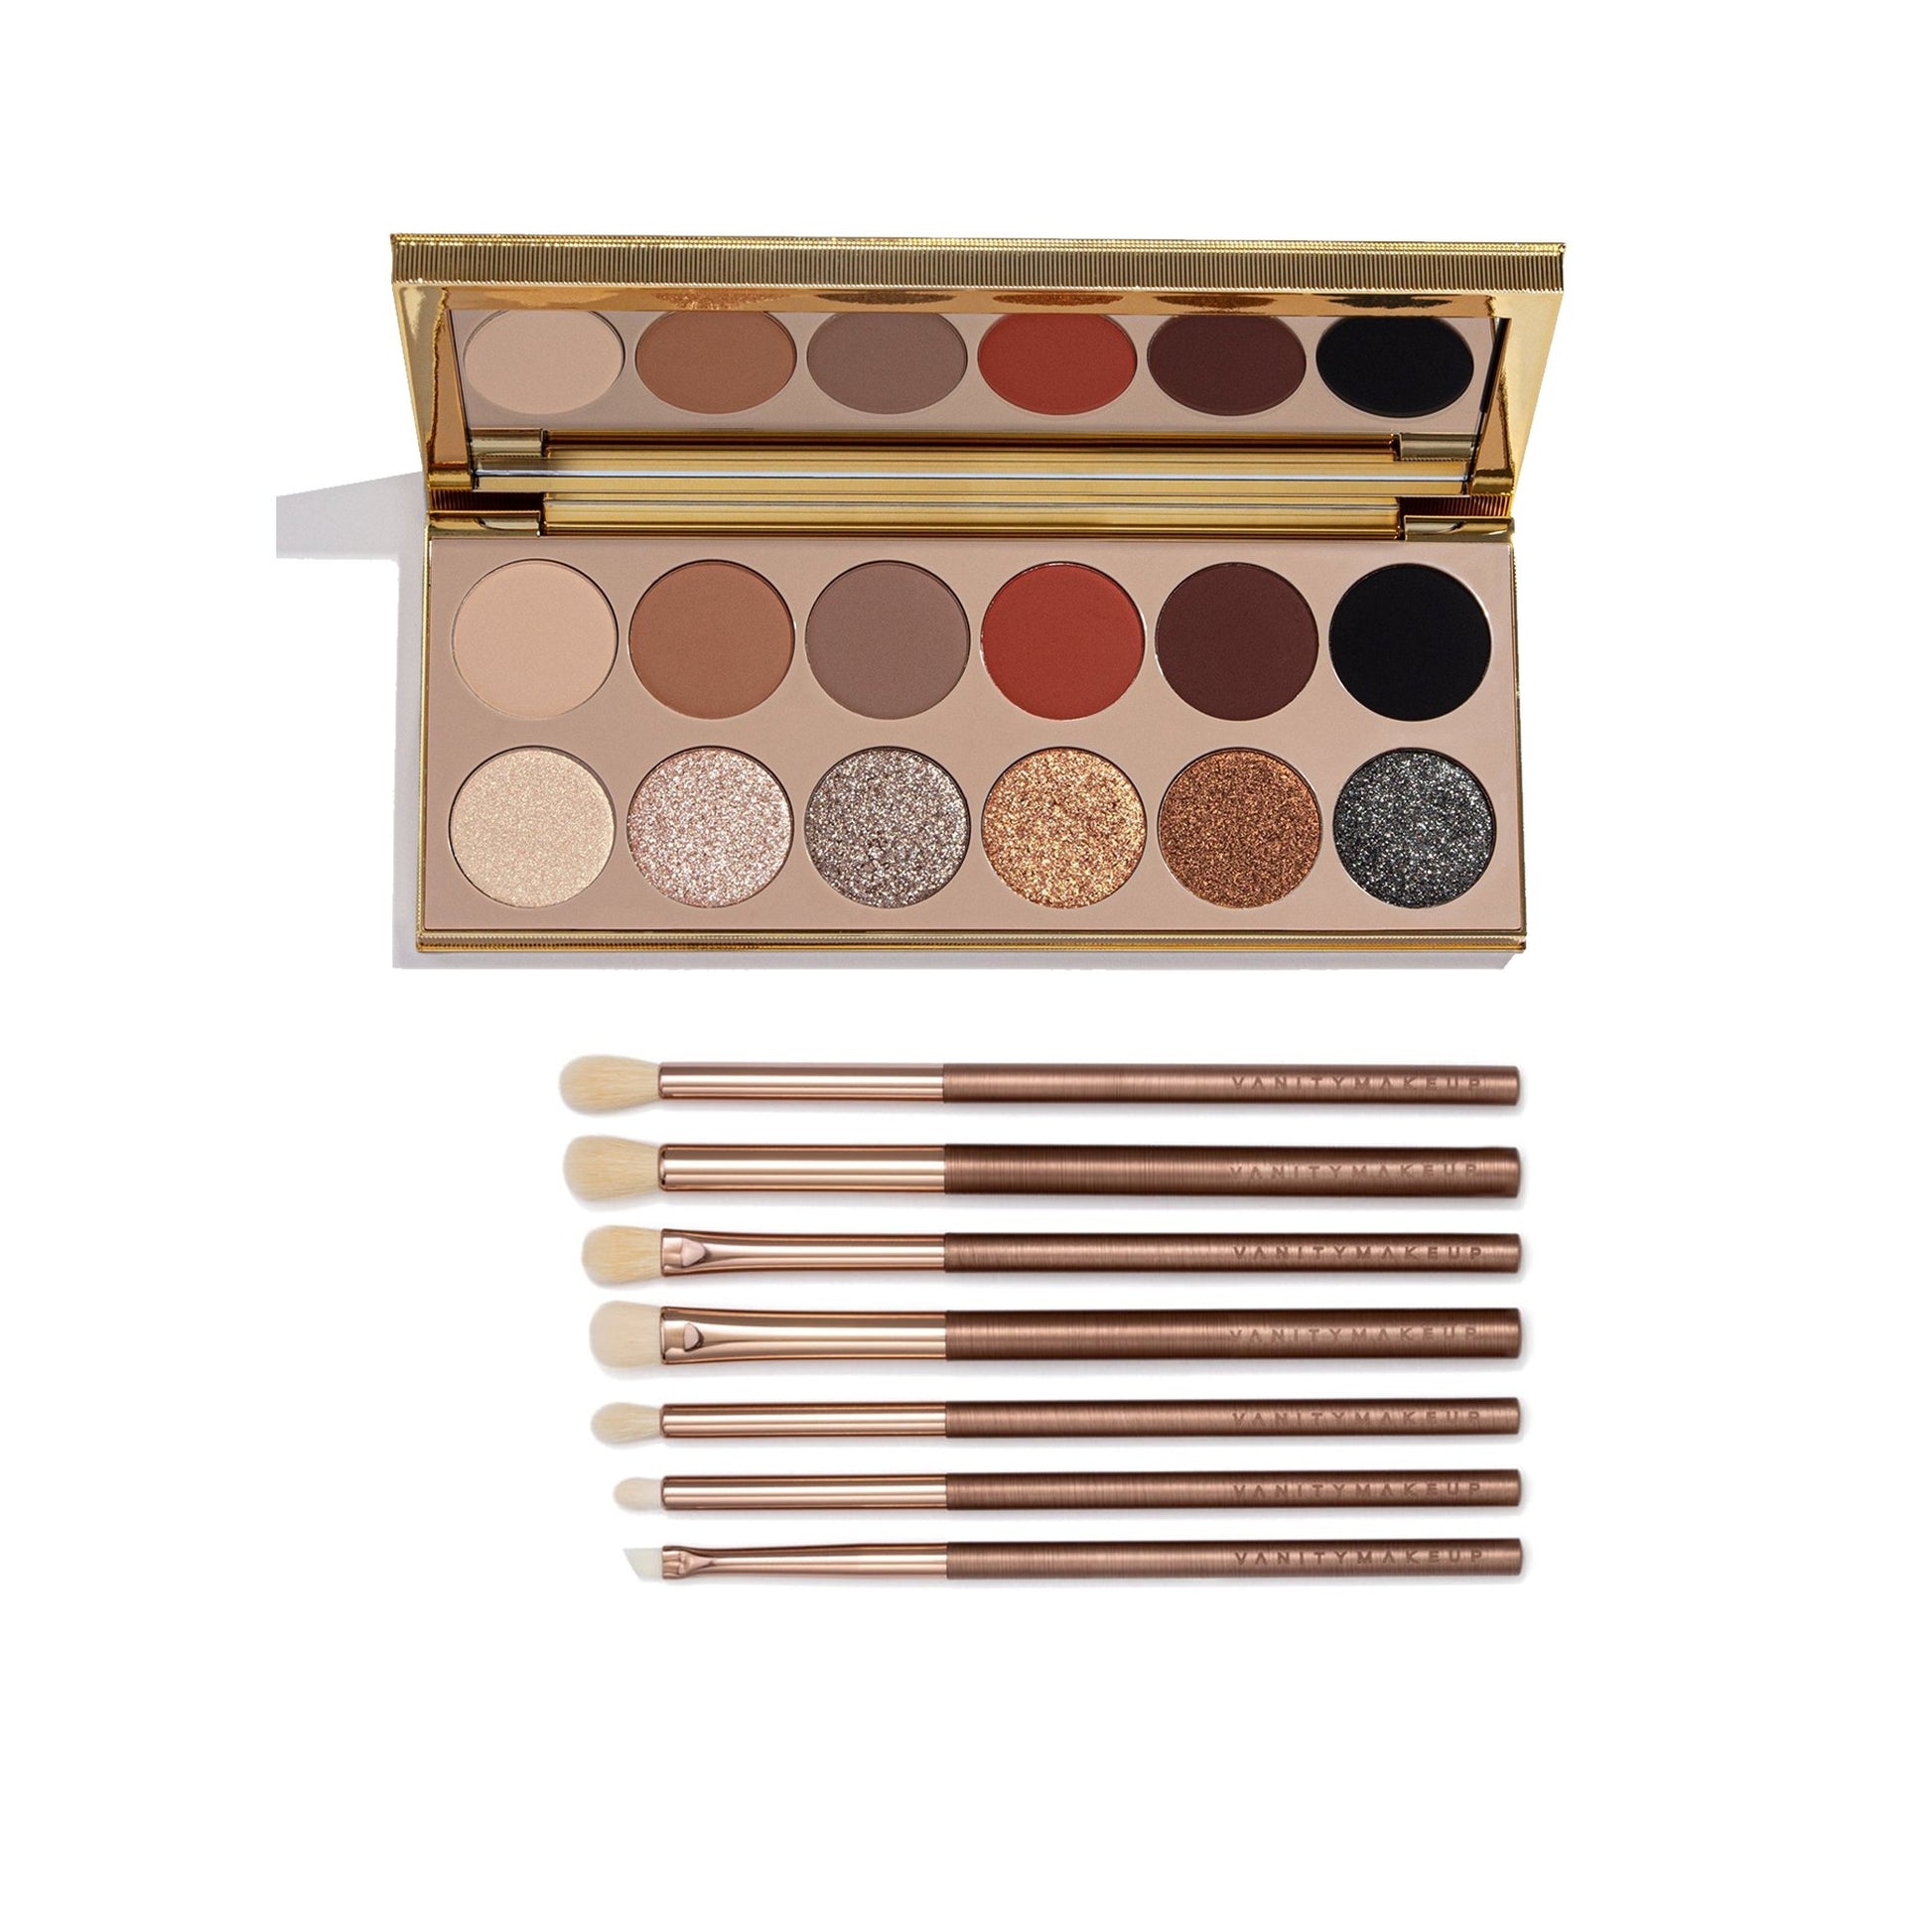 Beauty Revolution Makeup Mystery Box - Exclusive All in One Makeup Set -  Includes Various Makeup Palettes, Brushes, Eyeshadow Palette, Lip Stick and